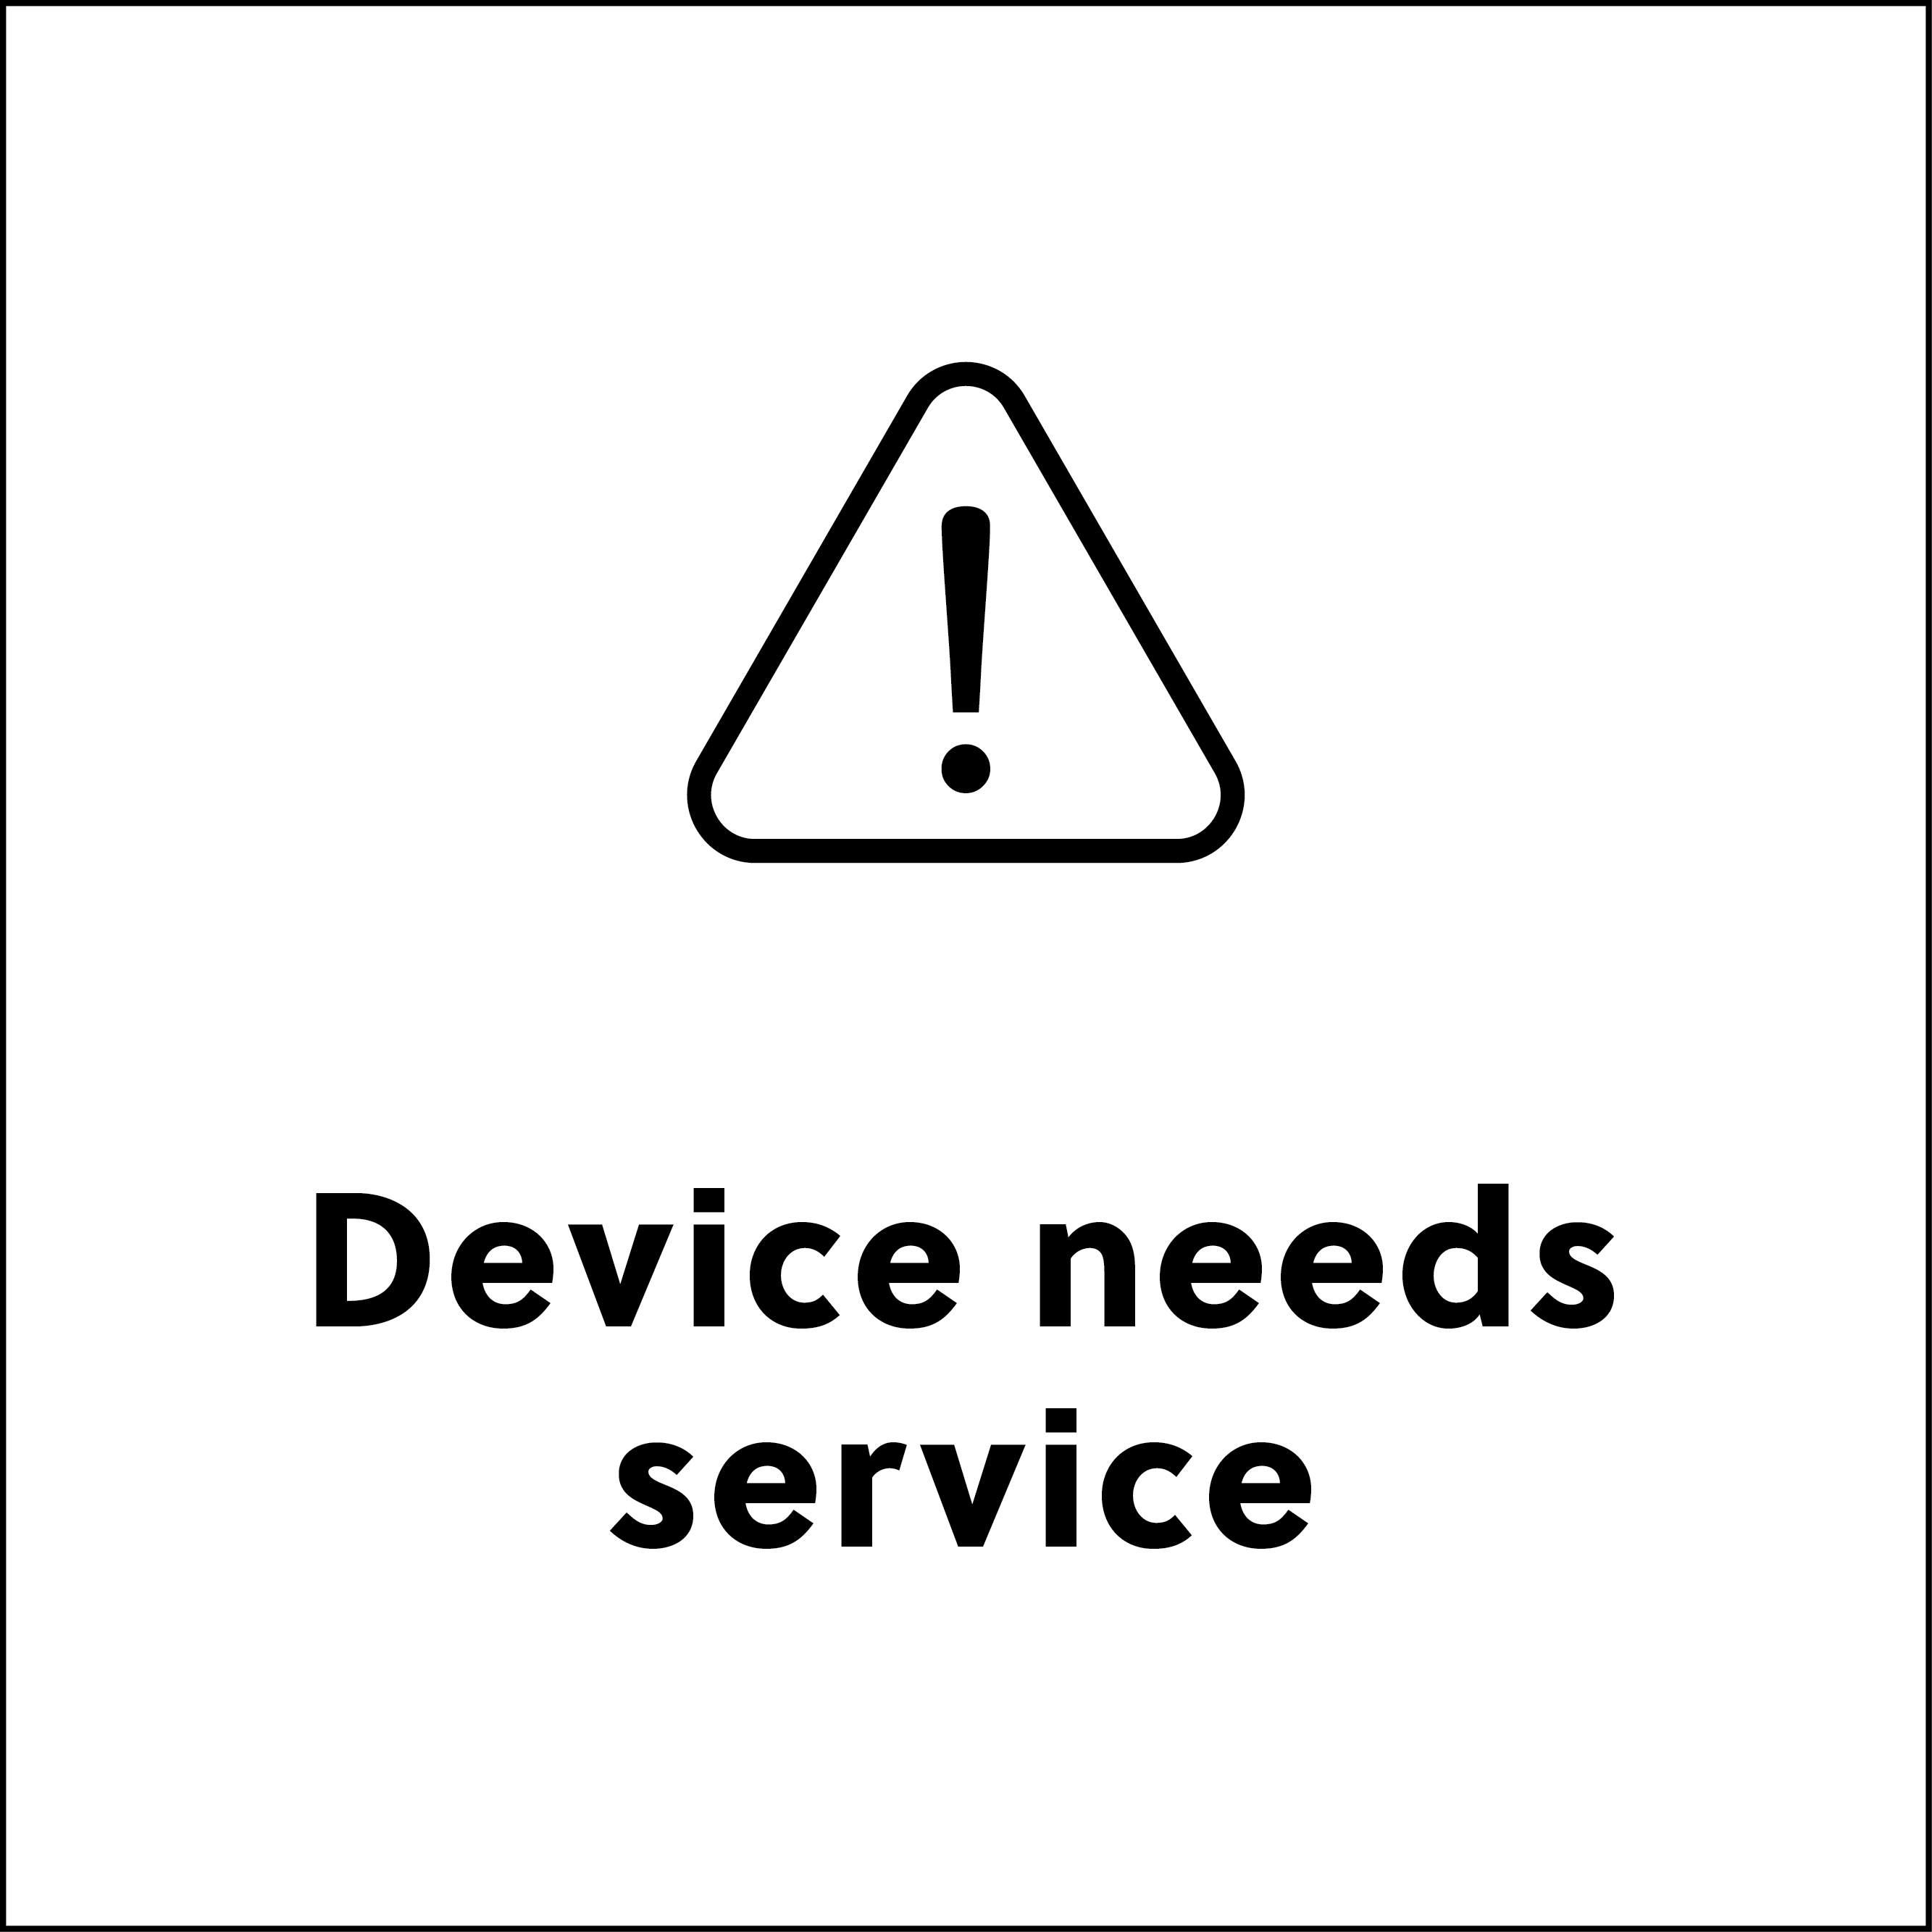 "Device needs service" text written under a warning exclamation mark in a triangle.